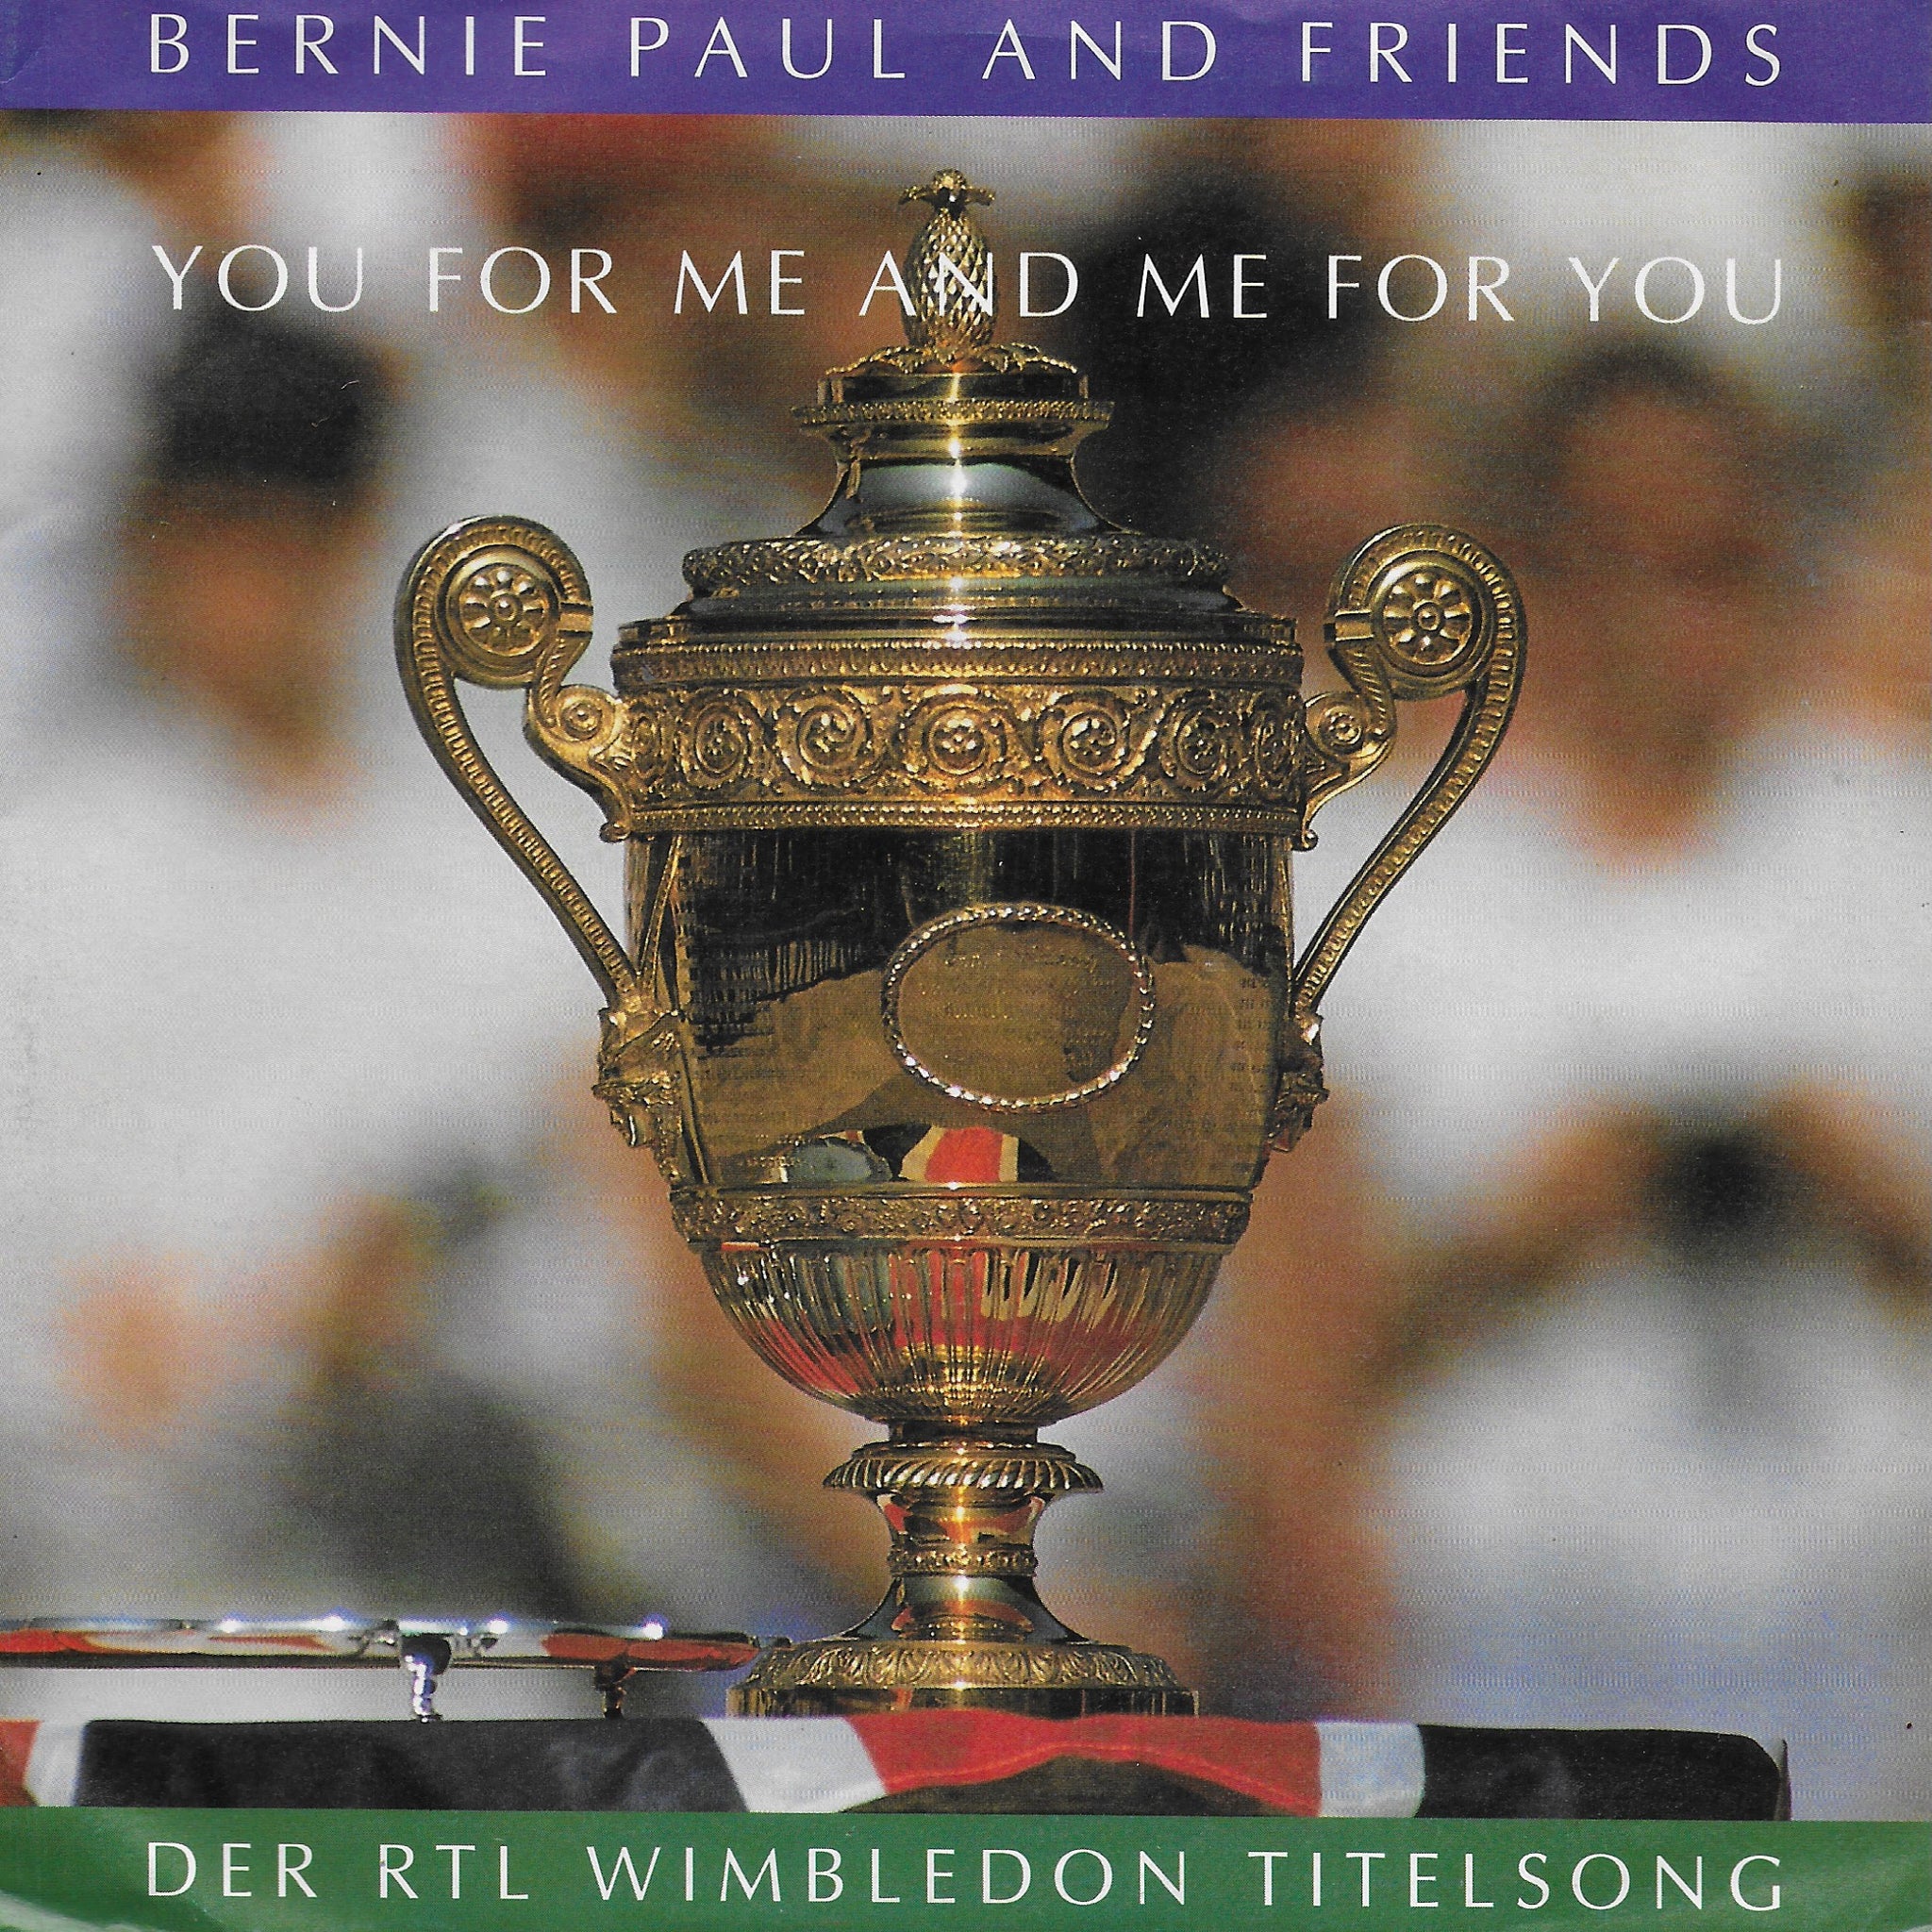 Bernie Paul and friends - You for me and me for you